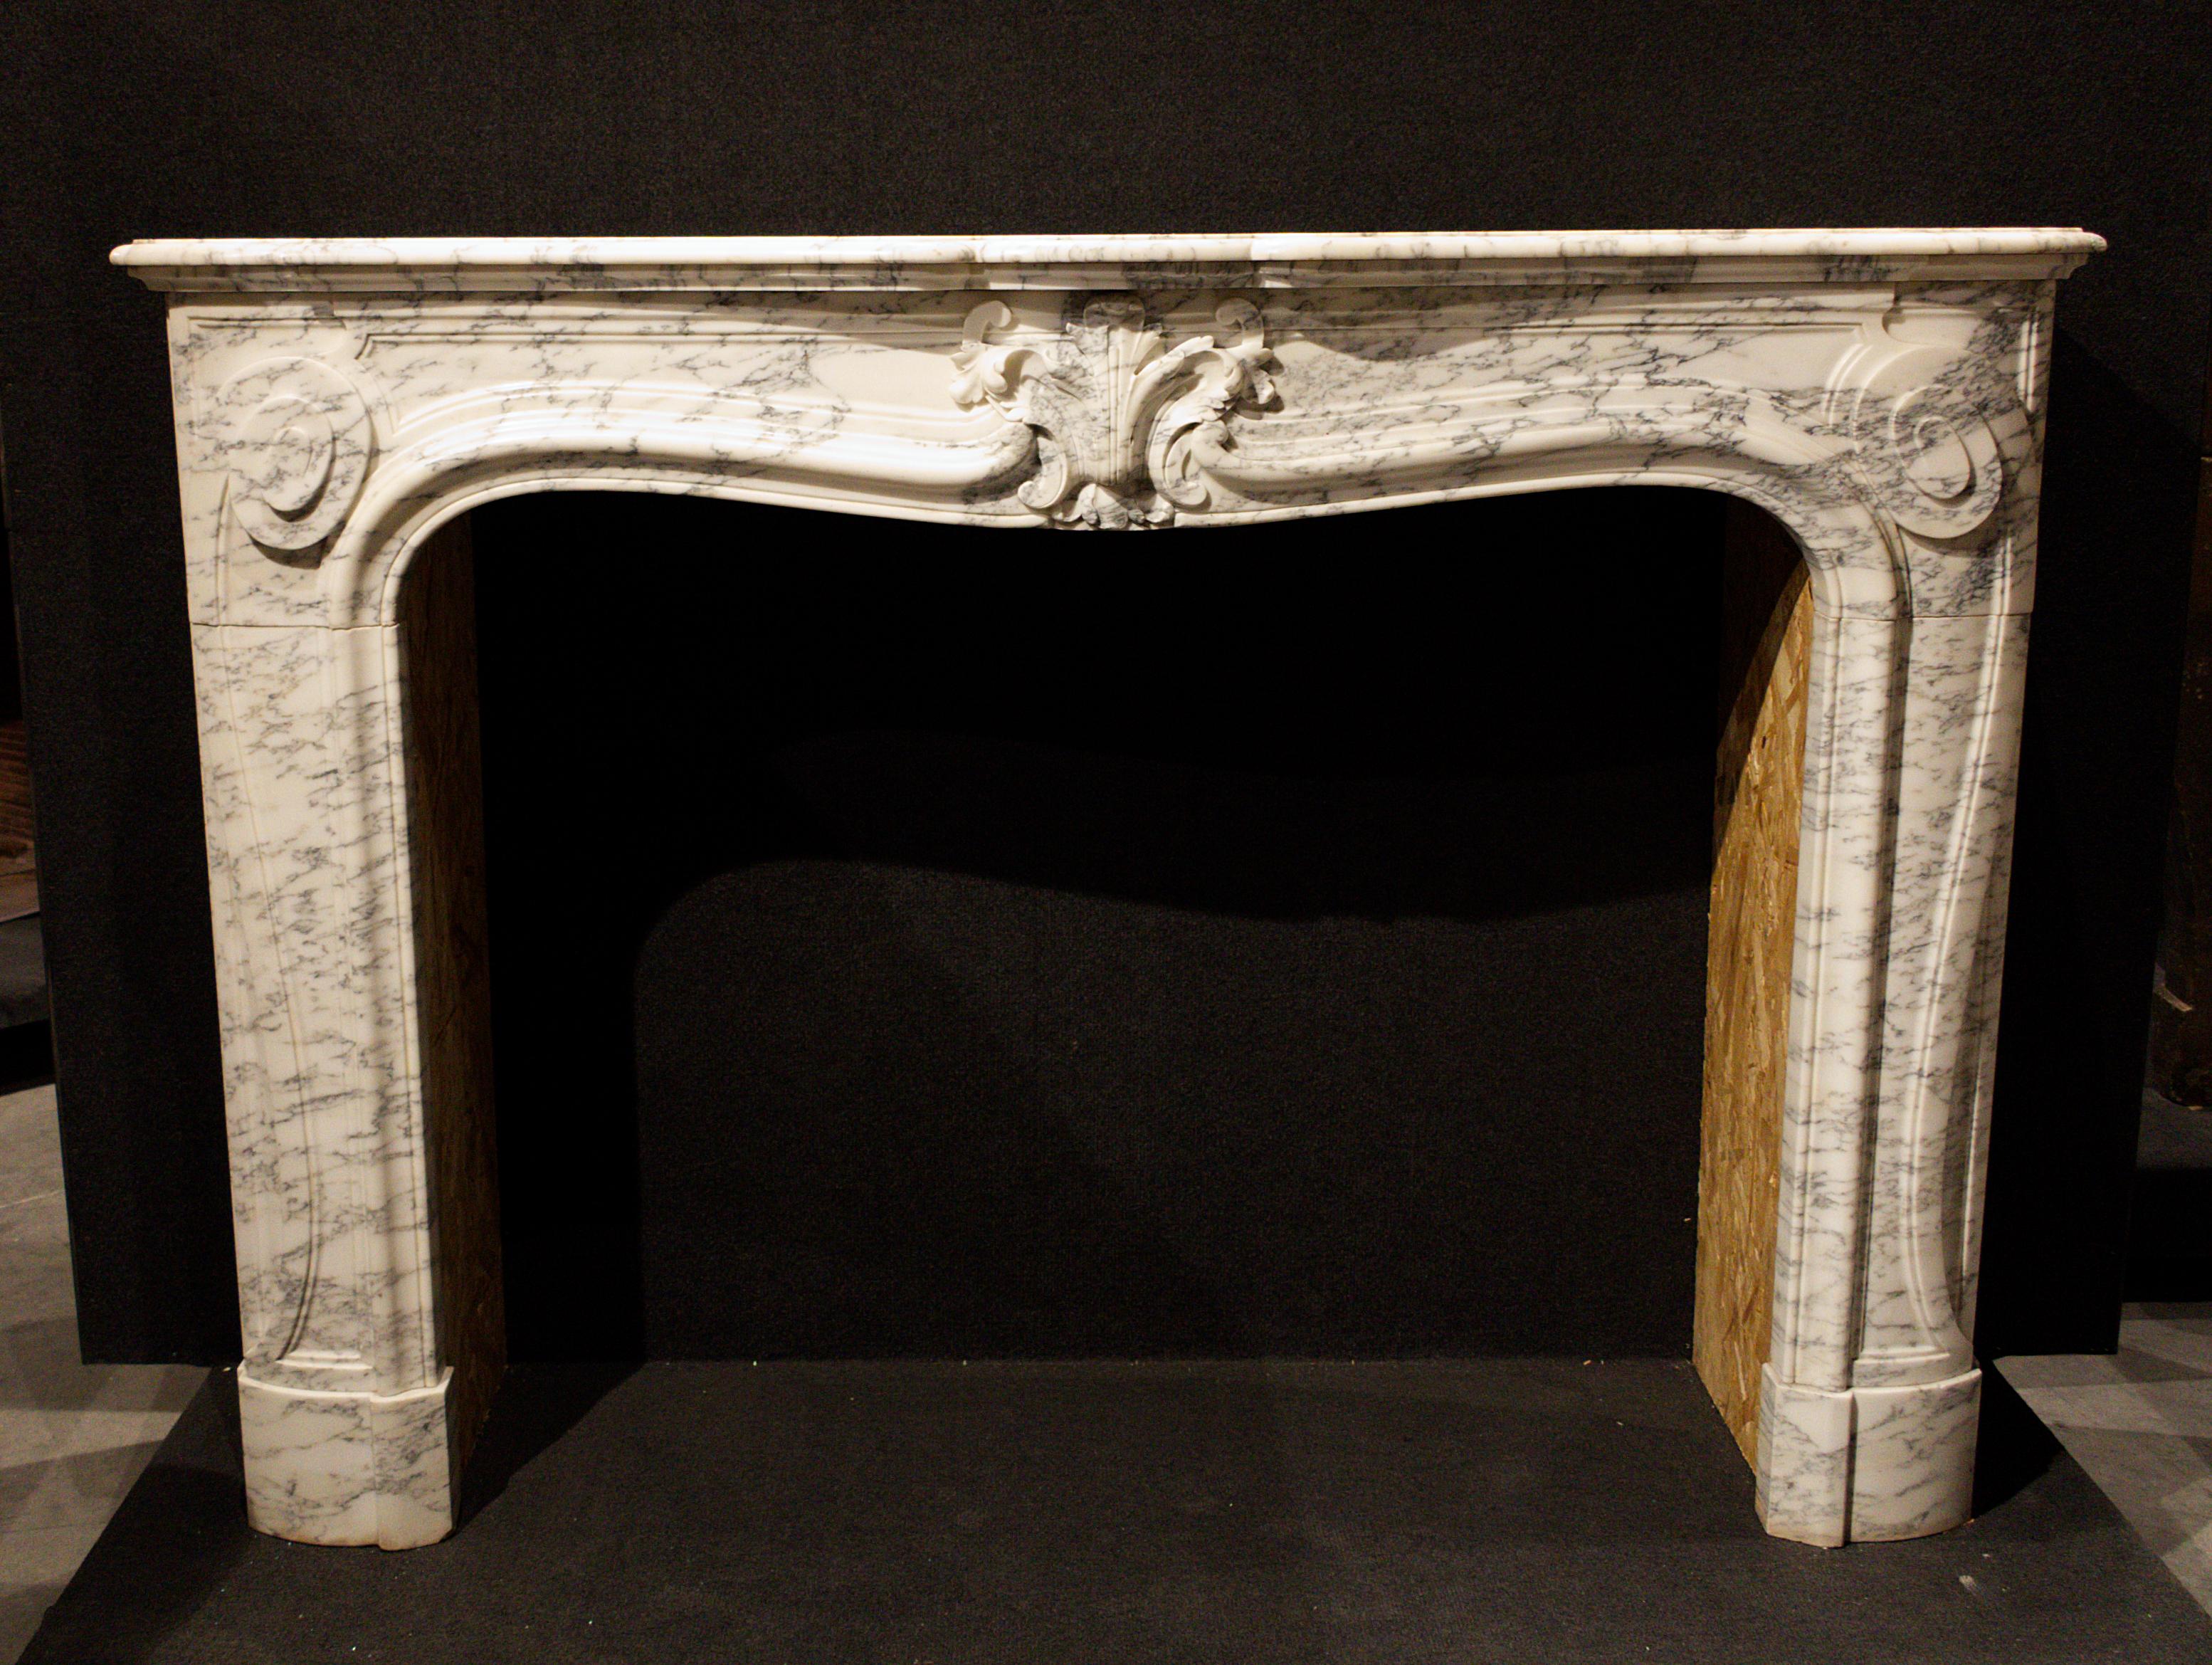 Truly stunning multicolored marble fireplace mantel with ornamental carving of exceptional quality. This grand decorative fireplace is sure to be the most captivating focal point in your classy, sophisticated interior.

The most captivating beauty